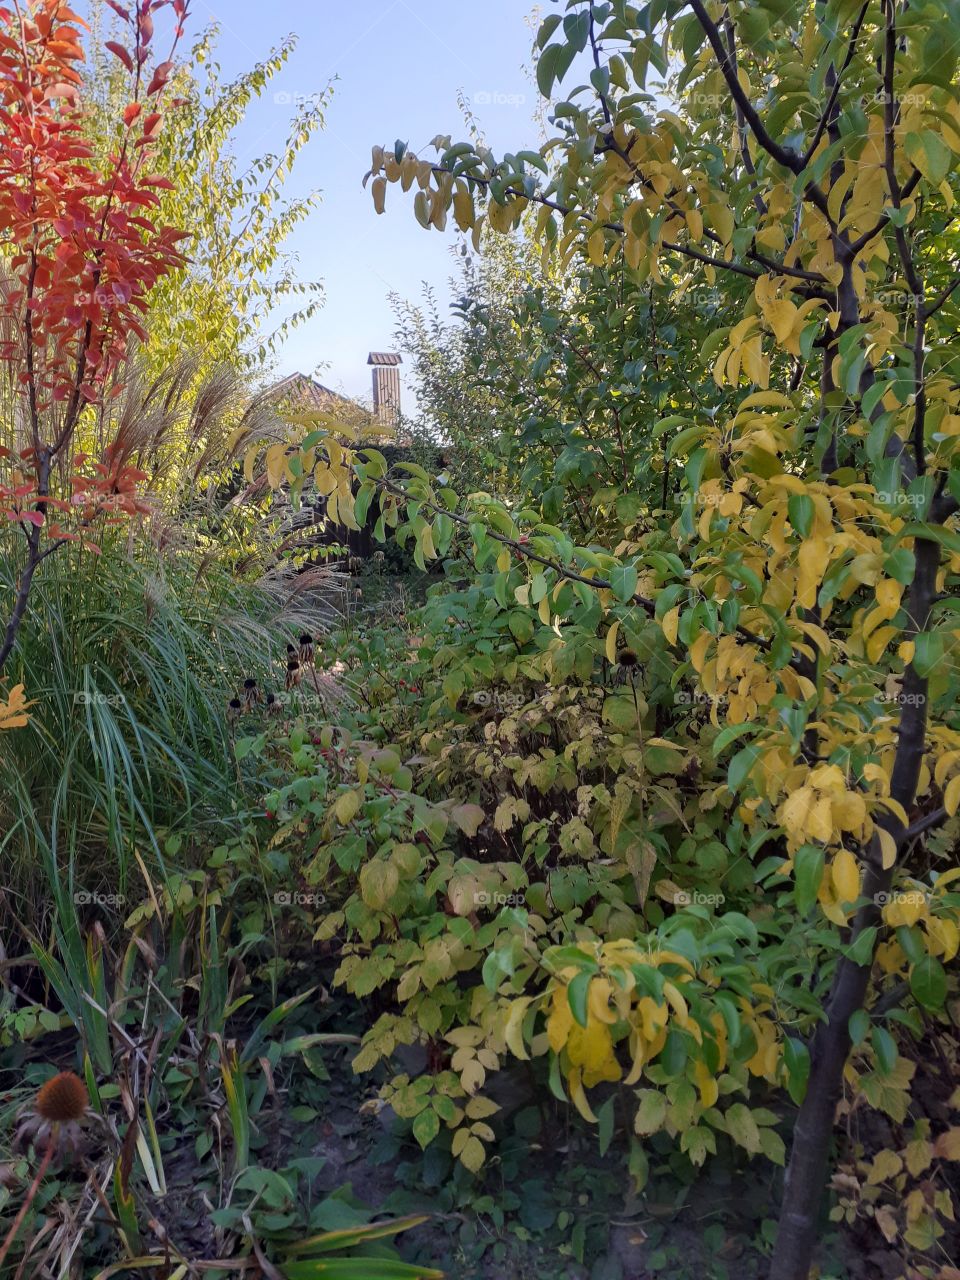 Autumn is coming to my garden